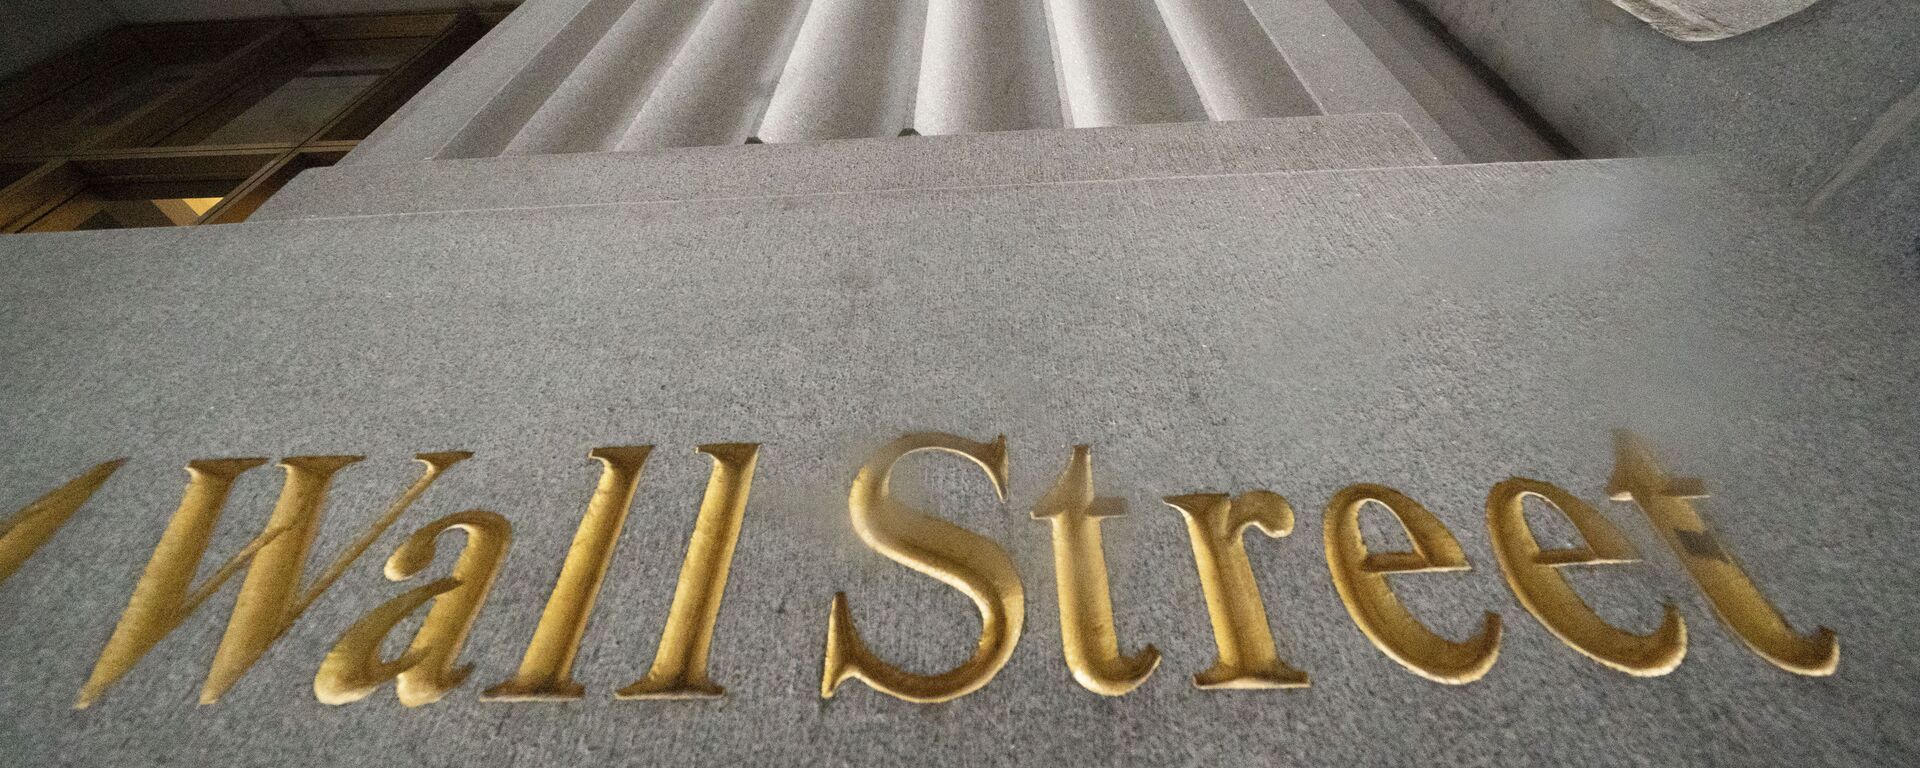 n this Nov. 5, 2020 file photo, a sign for Wall Street is carved in the side of a building. Stocks are easing lower in early trading on Wall Street, pulling major indexes slightly below the record highs they reached last week. - Sputnik International, 1920, 03.09.2021